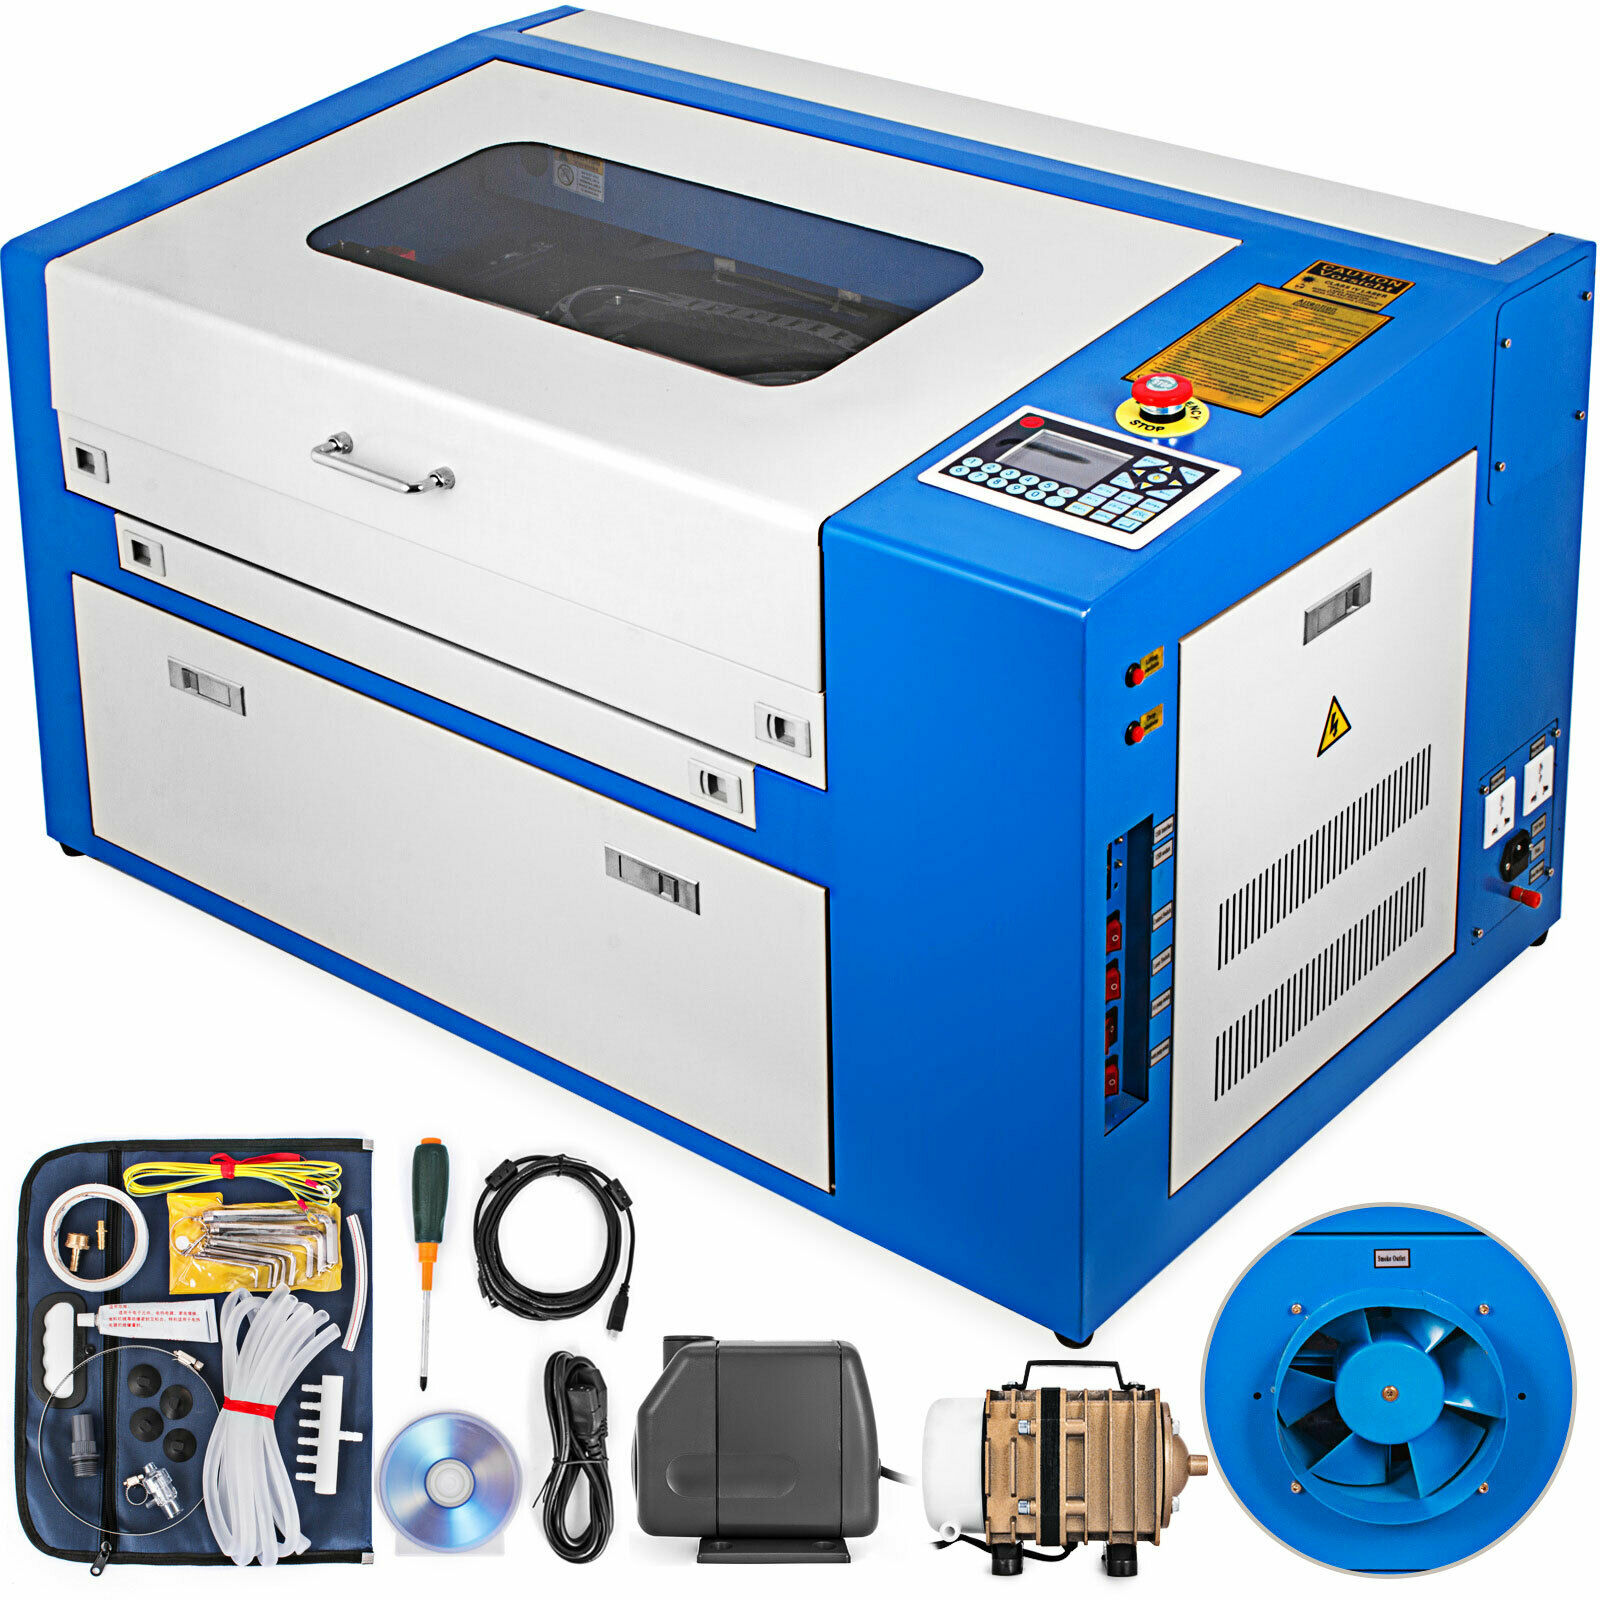 HIGH PROMOTION 50W CO2 LASER ENGRAVING CUTTING MACHINE ENGRAVER CUTTER 300X500MM